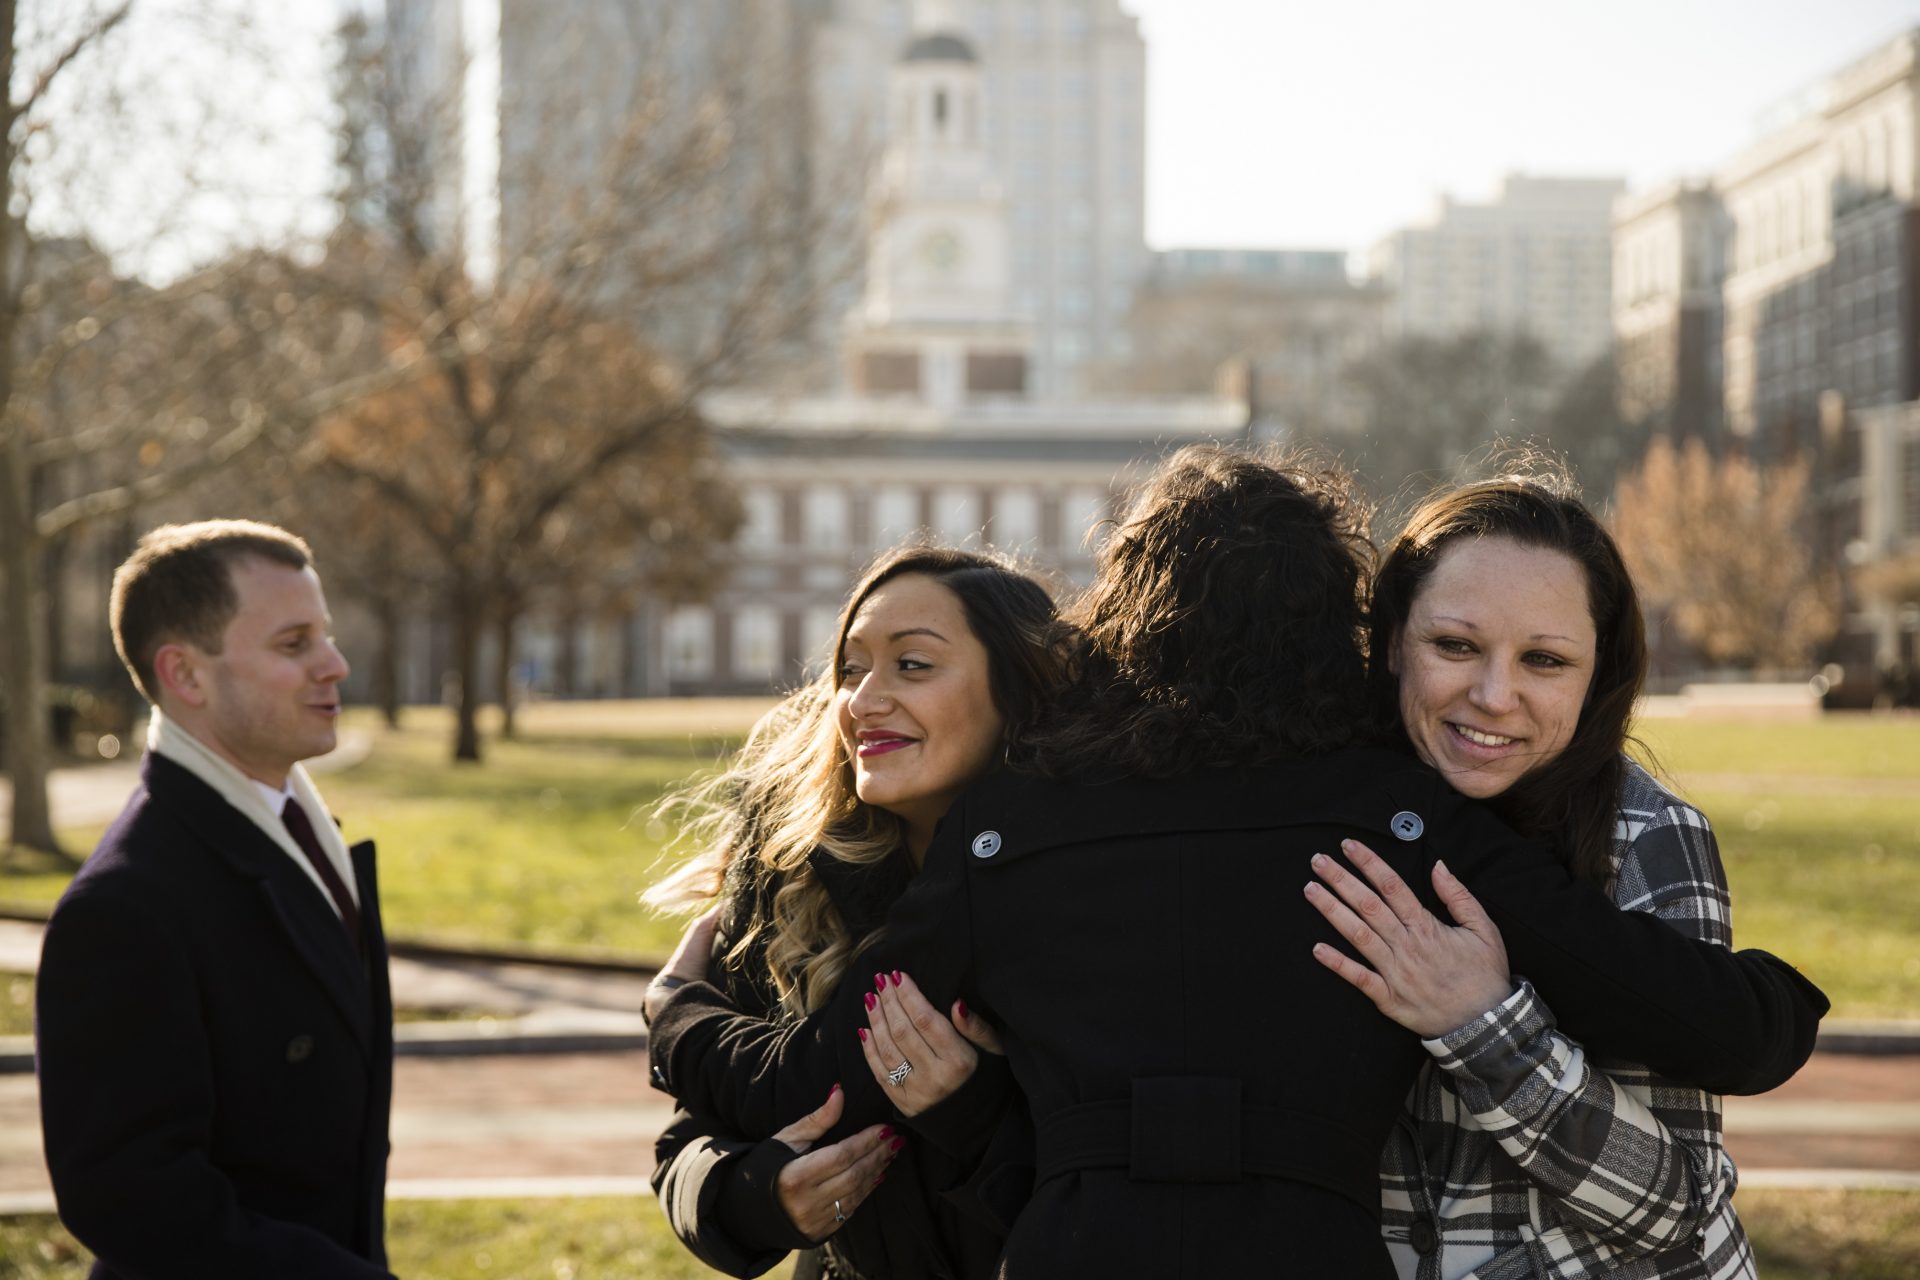 An attorney with the Institute for Justice, Erica Smith, center right, embraces Courtney Haveman, center, and Amanda Spillane, right as lawyer Andrew Ward looks on during a news conference in view of Independence Hall in Philadelphia.